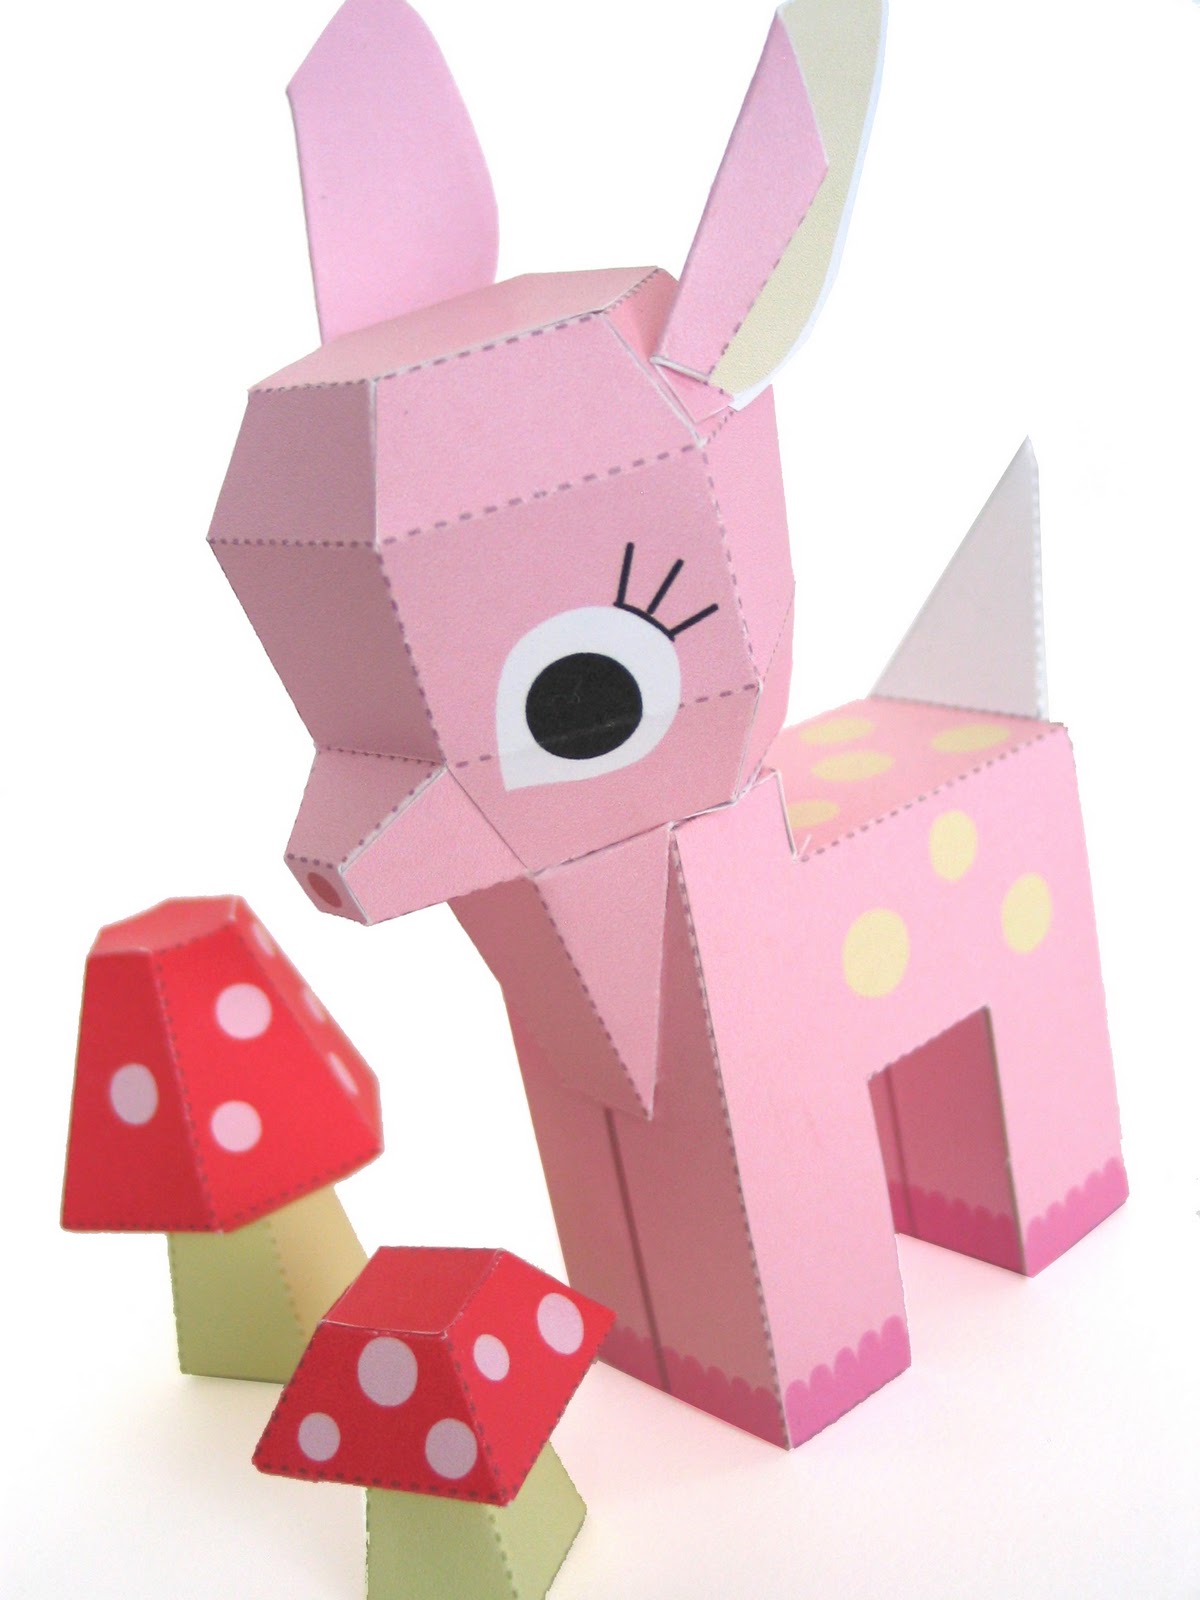 6 Best Images Of Free Printable Cute Paper Toys Cute Animal Paper Toy